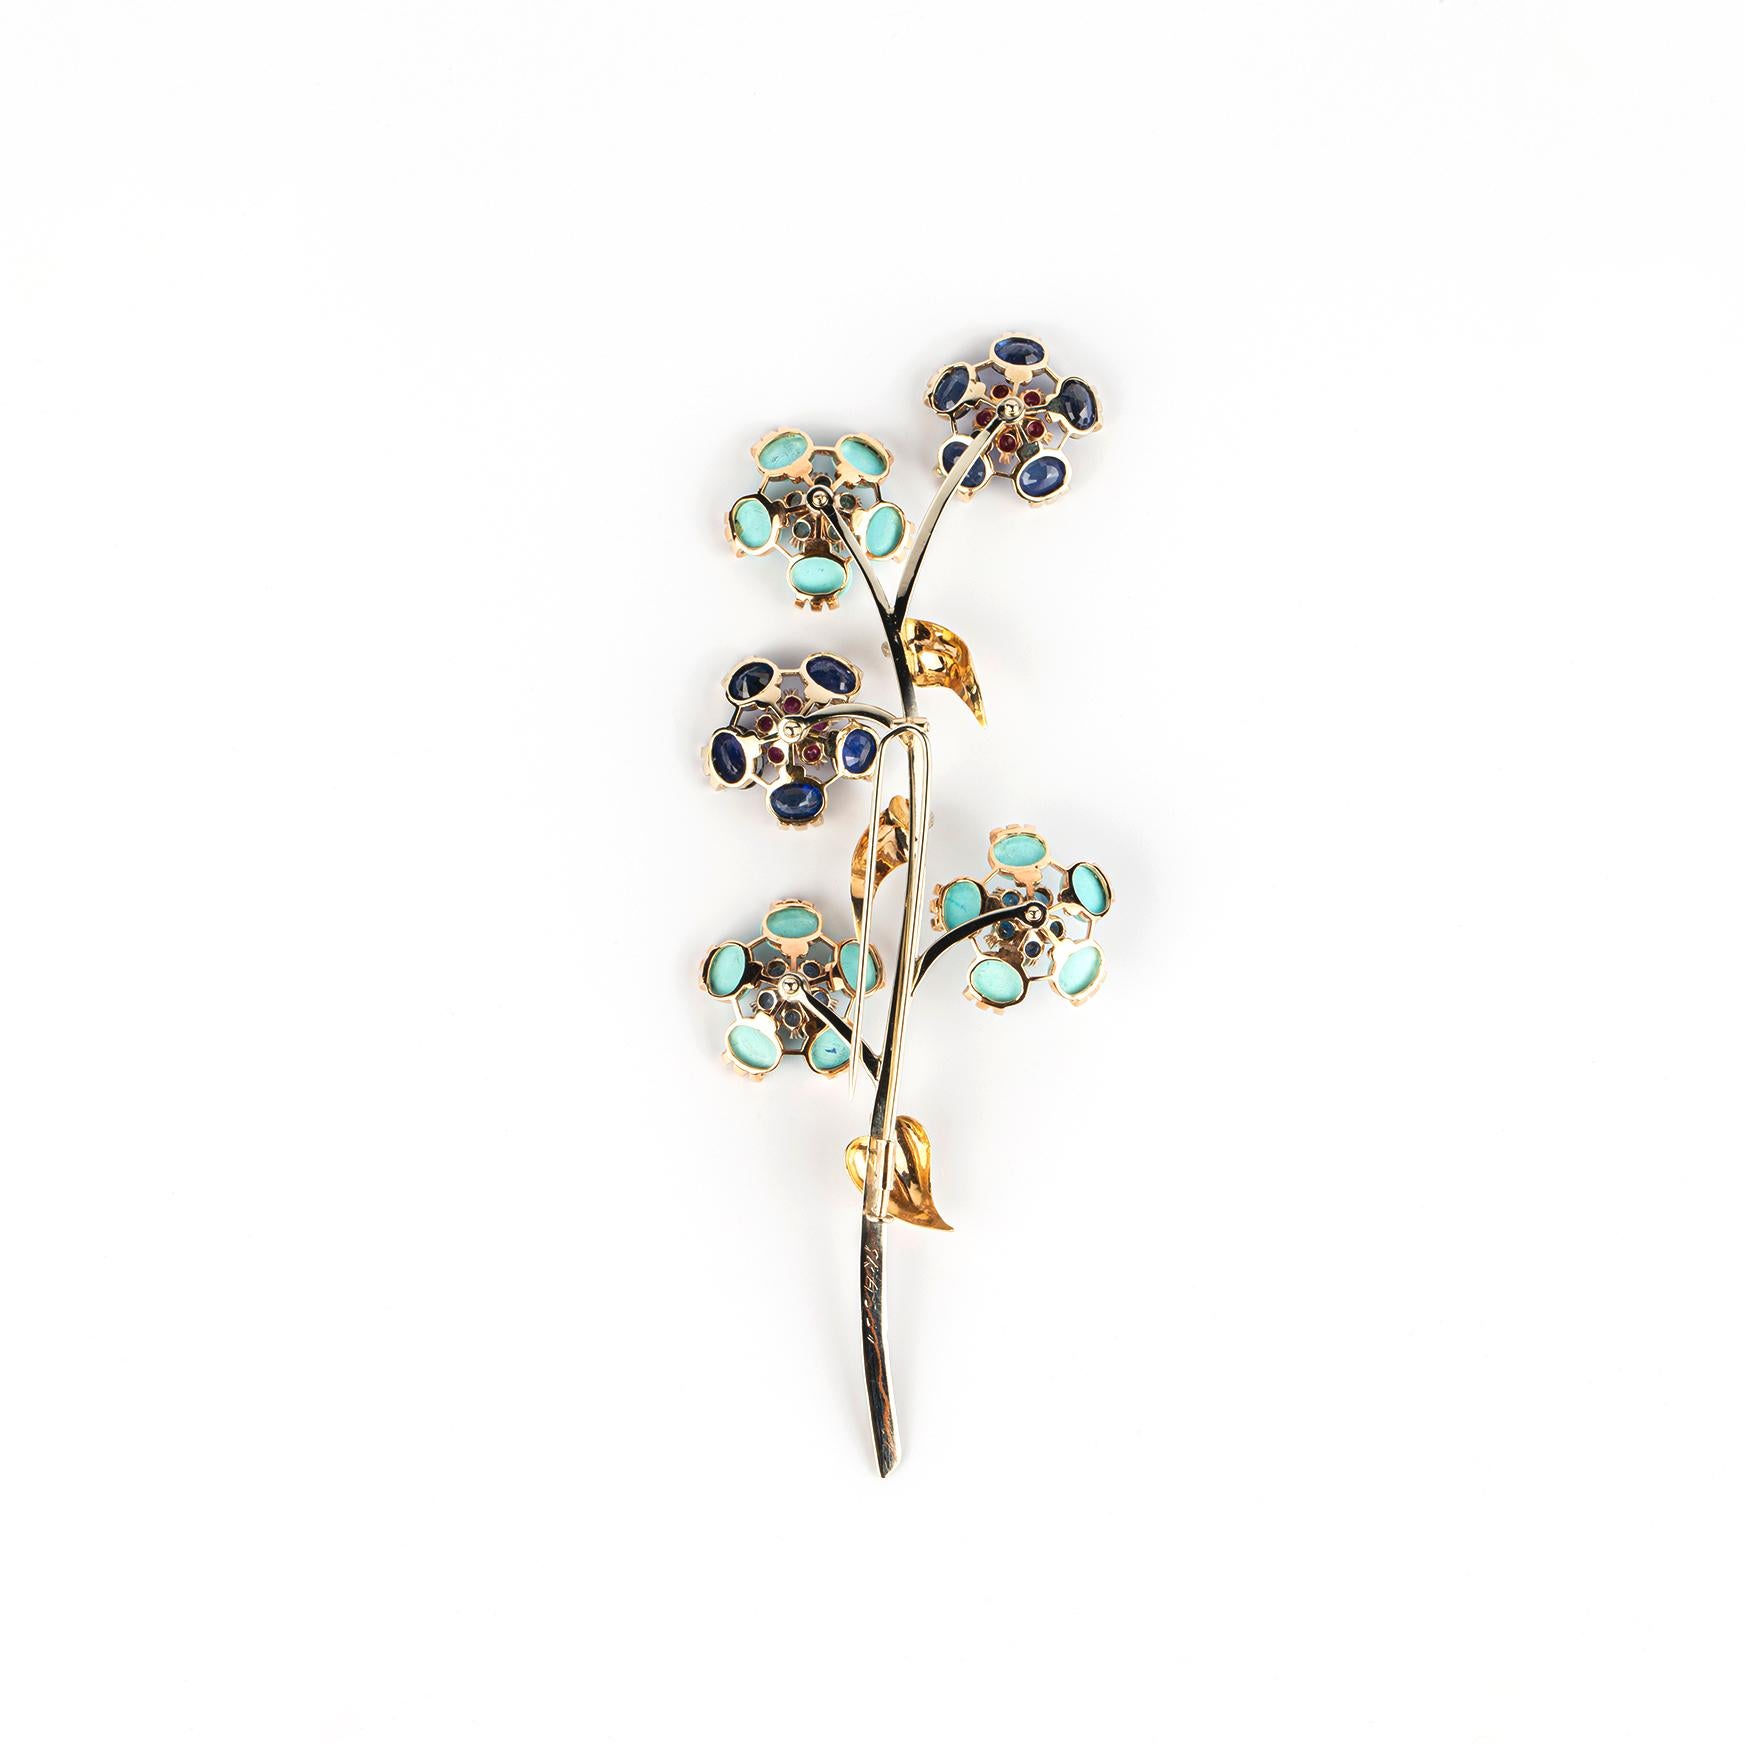 Grassi ‘En Tremblant’ Gold and Multi-Gem Brooch In Excellent Condition For Sale In New York, NY